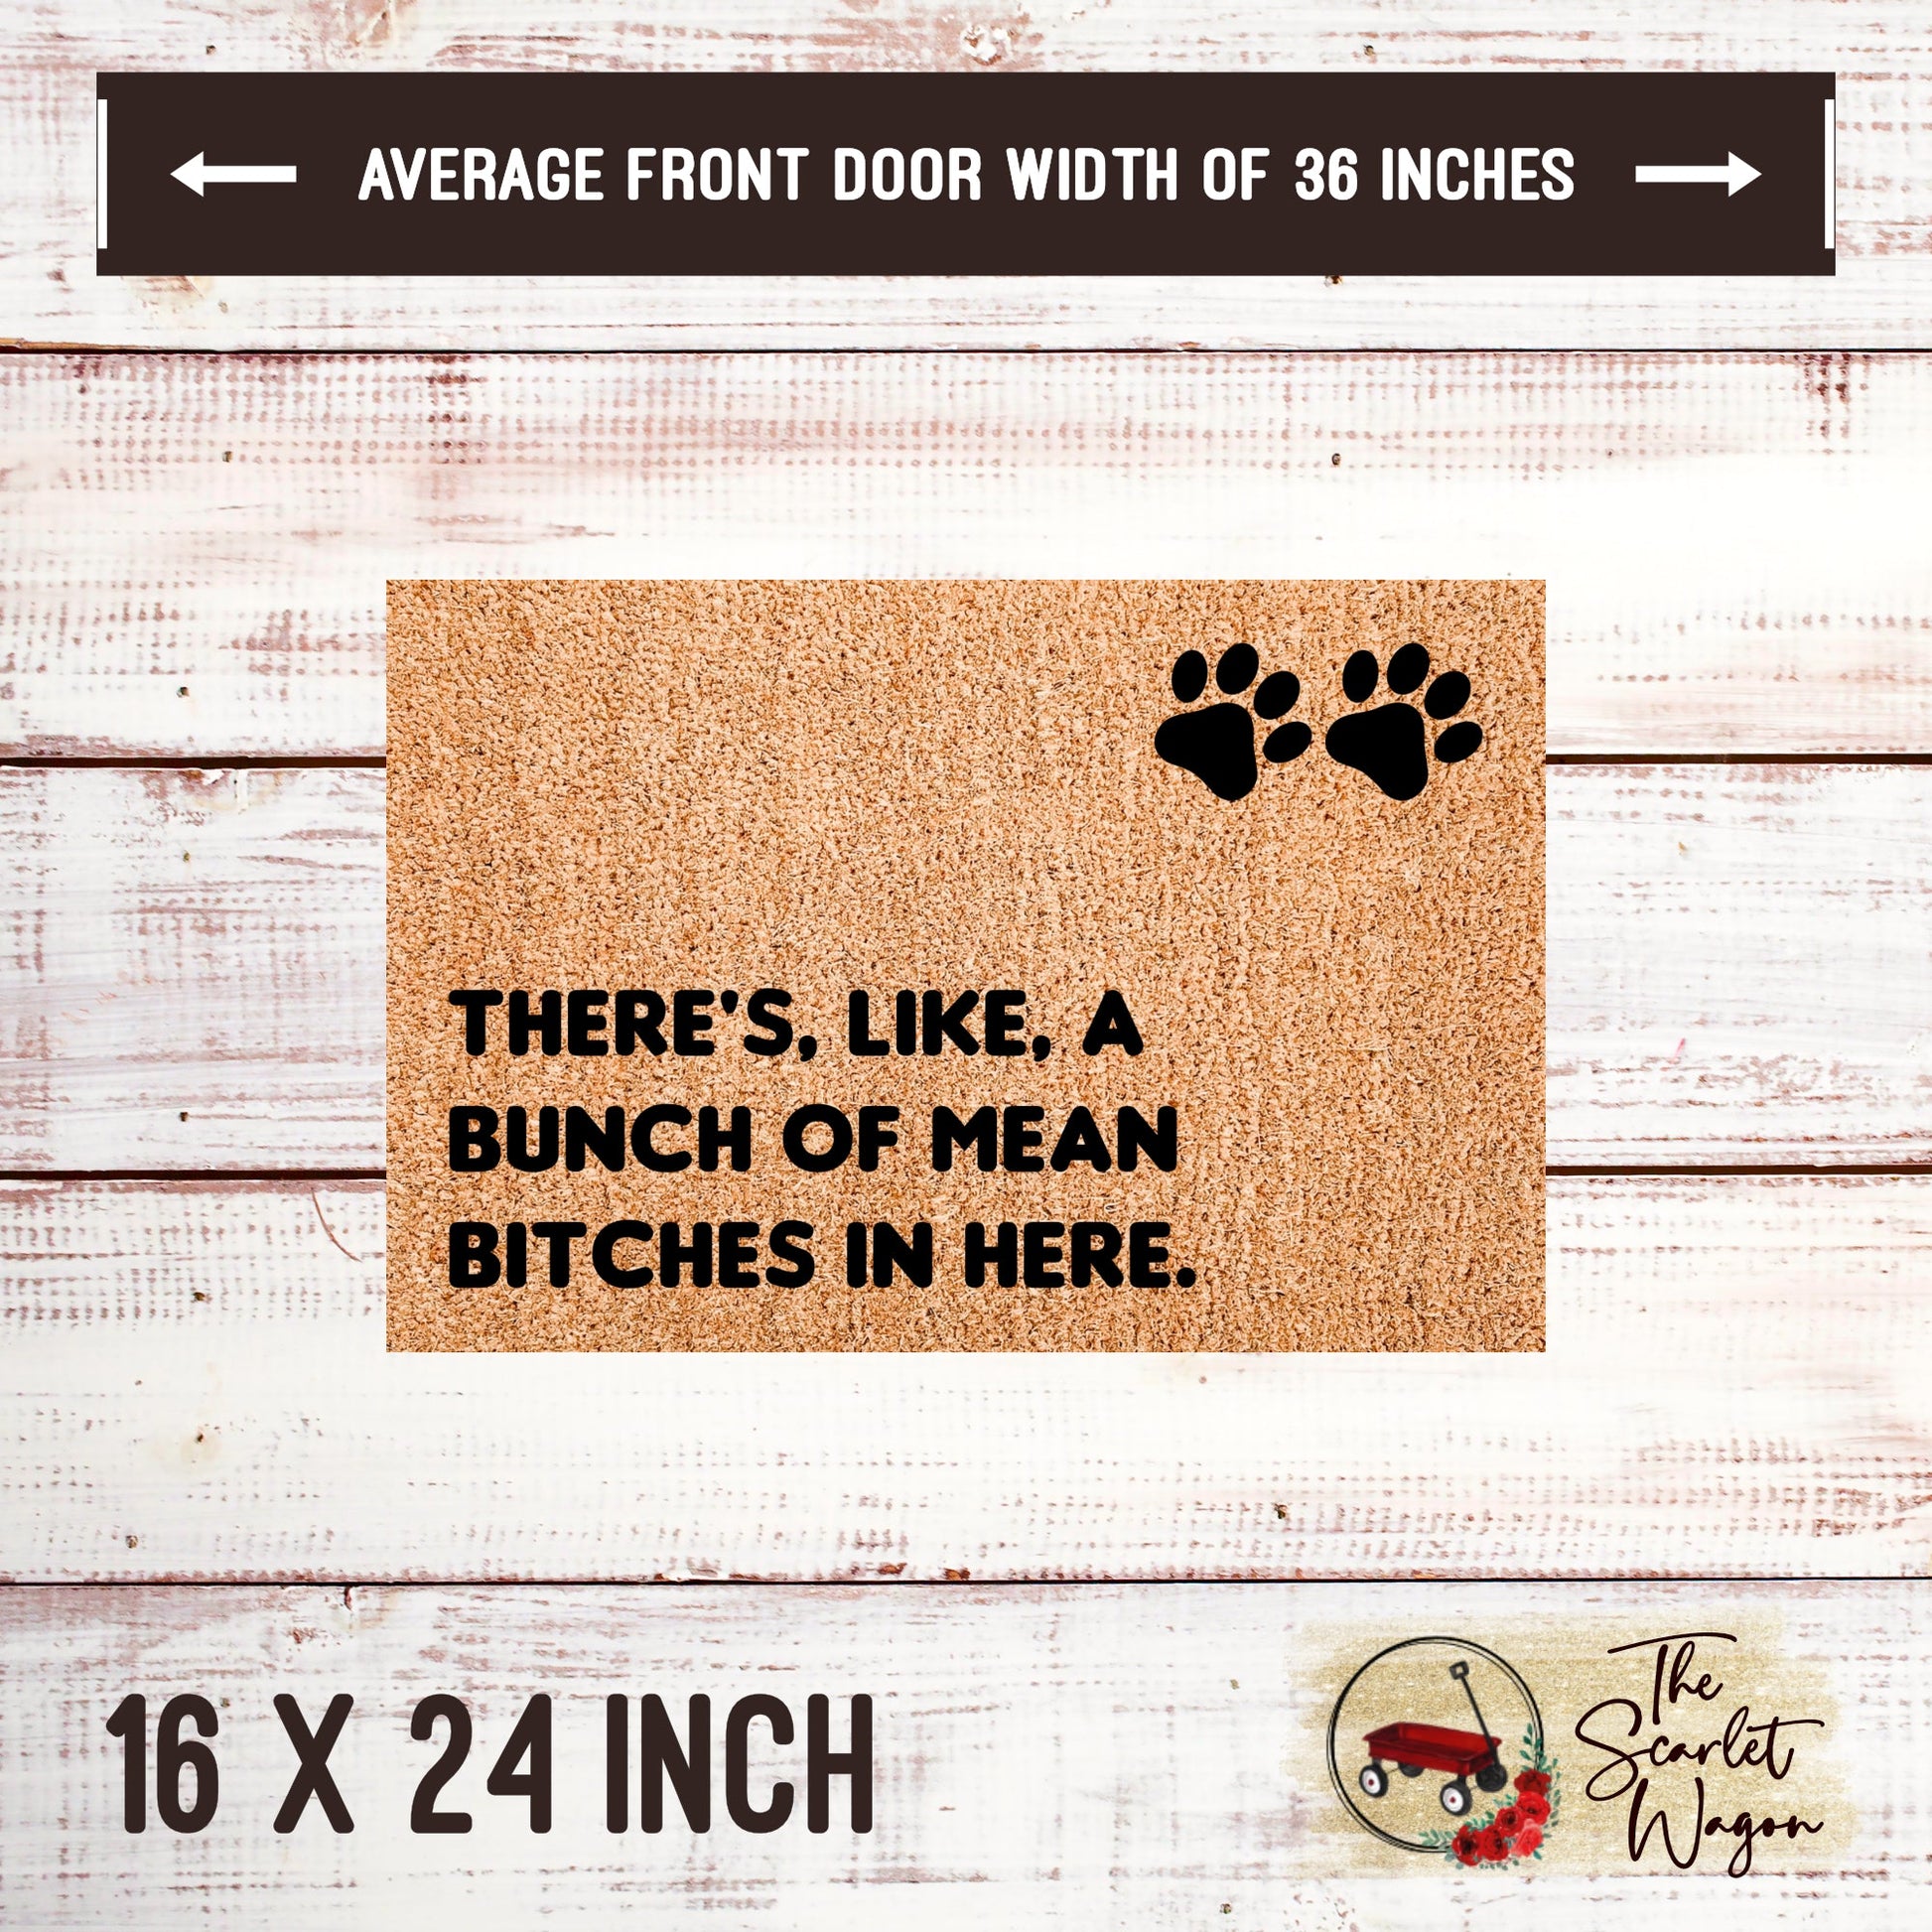 Bunch of Mean Bitches in Here Door Mats teelaunch 16x24 Inches (Free Shipping) 